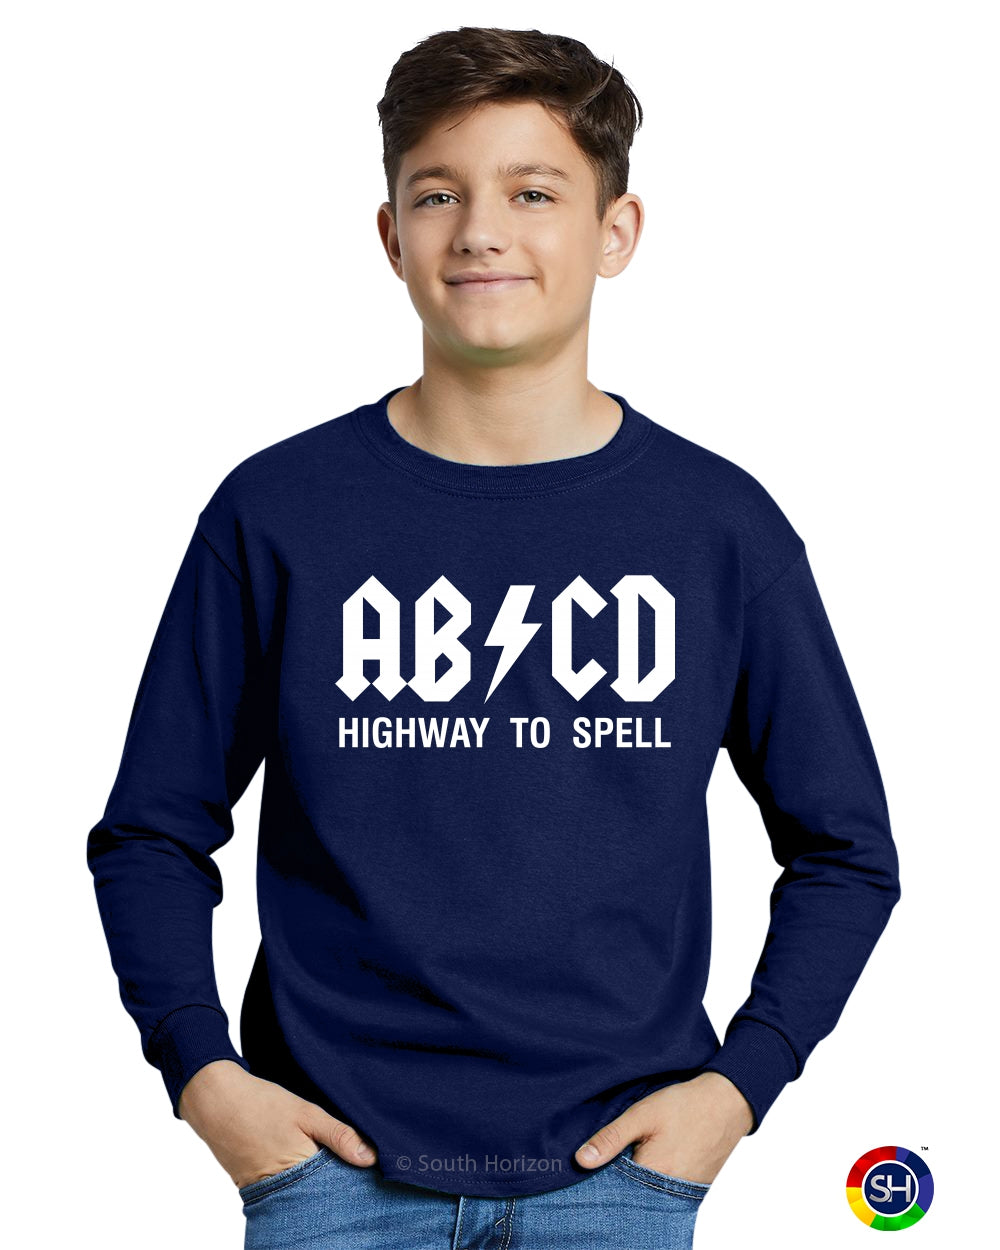 ABCD Highway To Spell on Youth Long Sleeve Shirt (#1236-203)